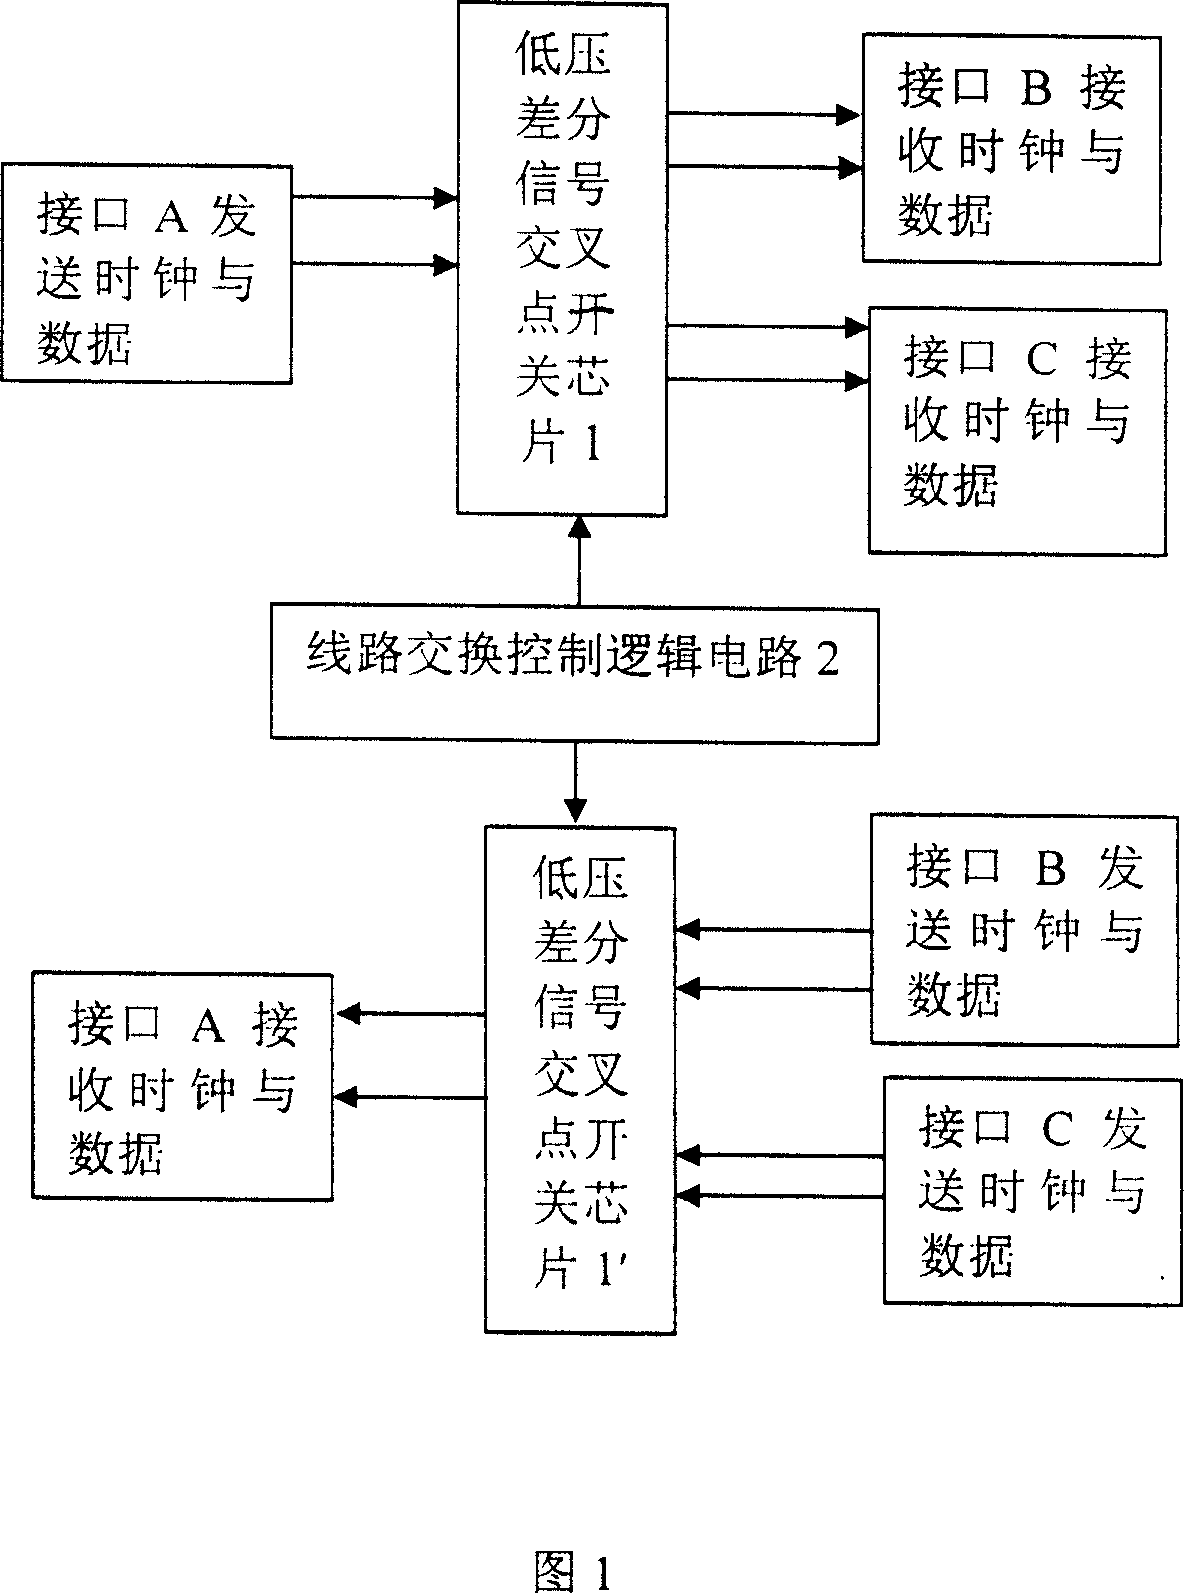 Extension device of data network node device port